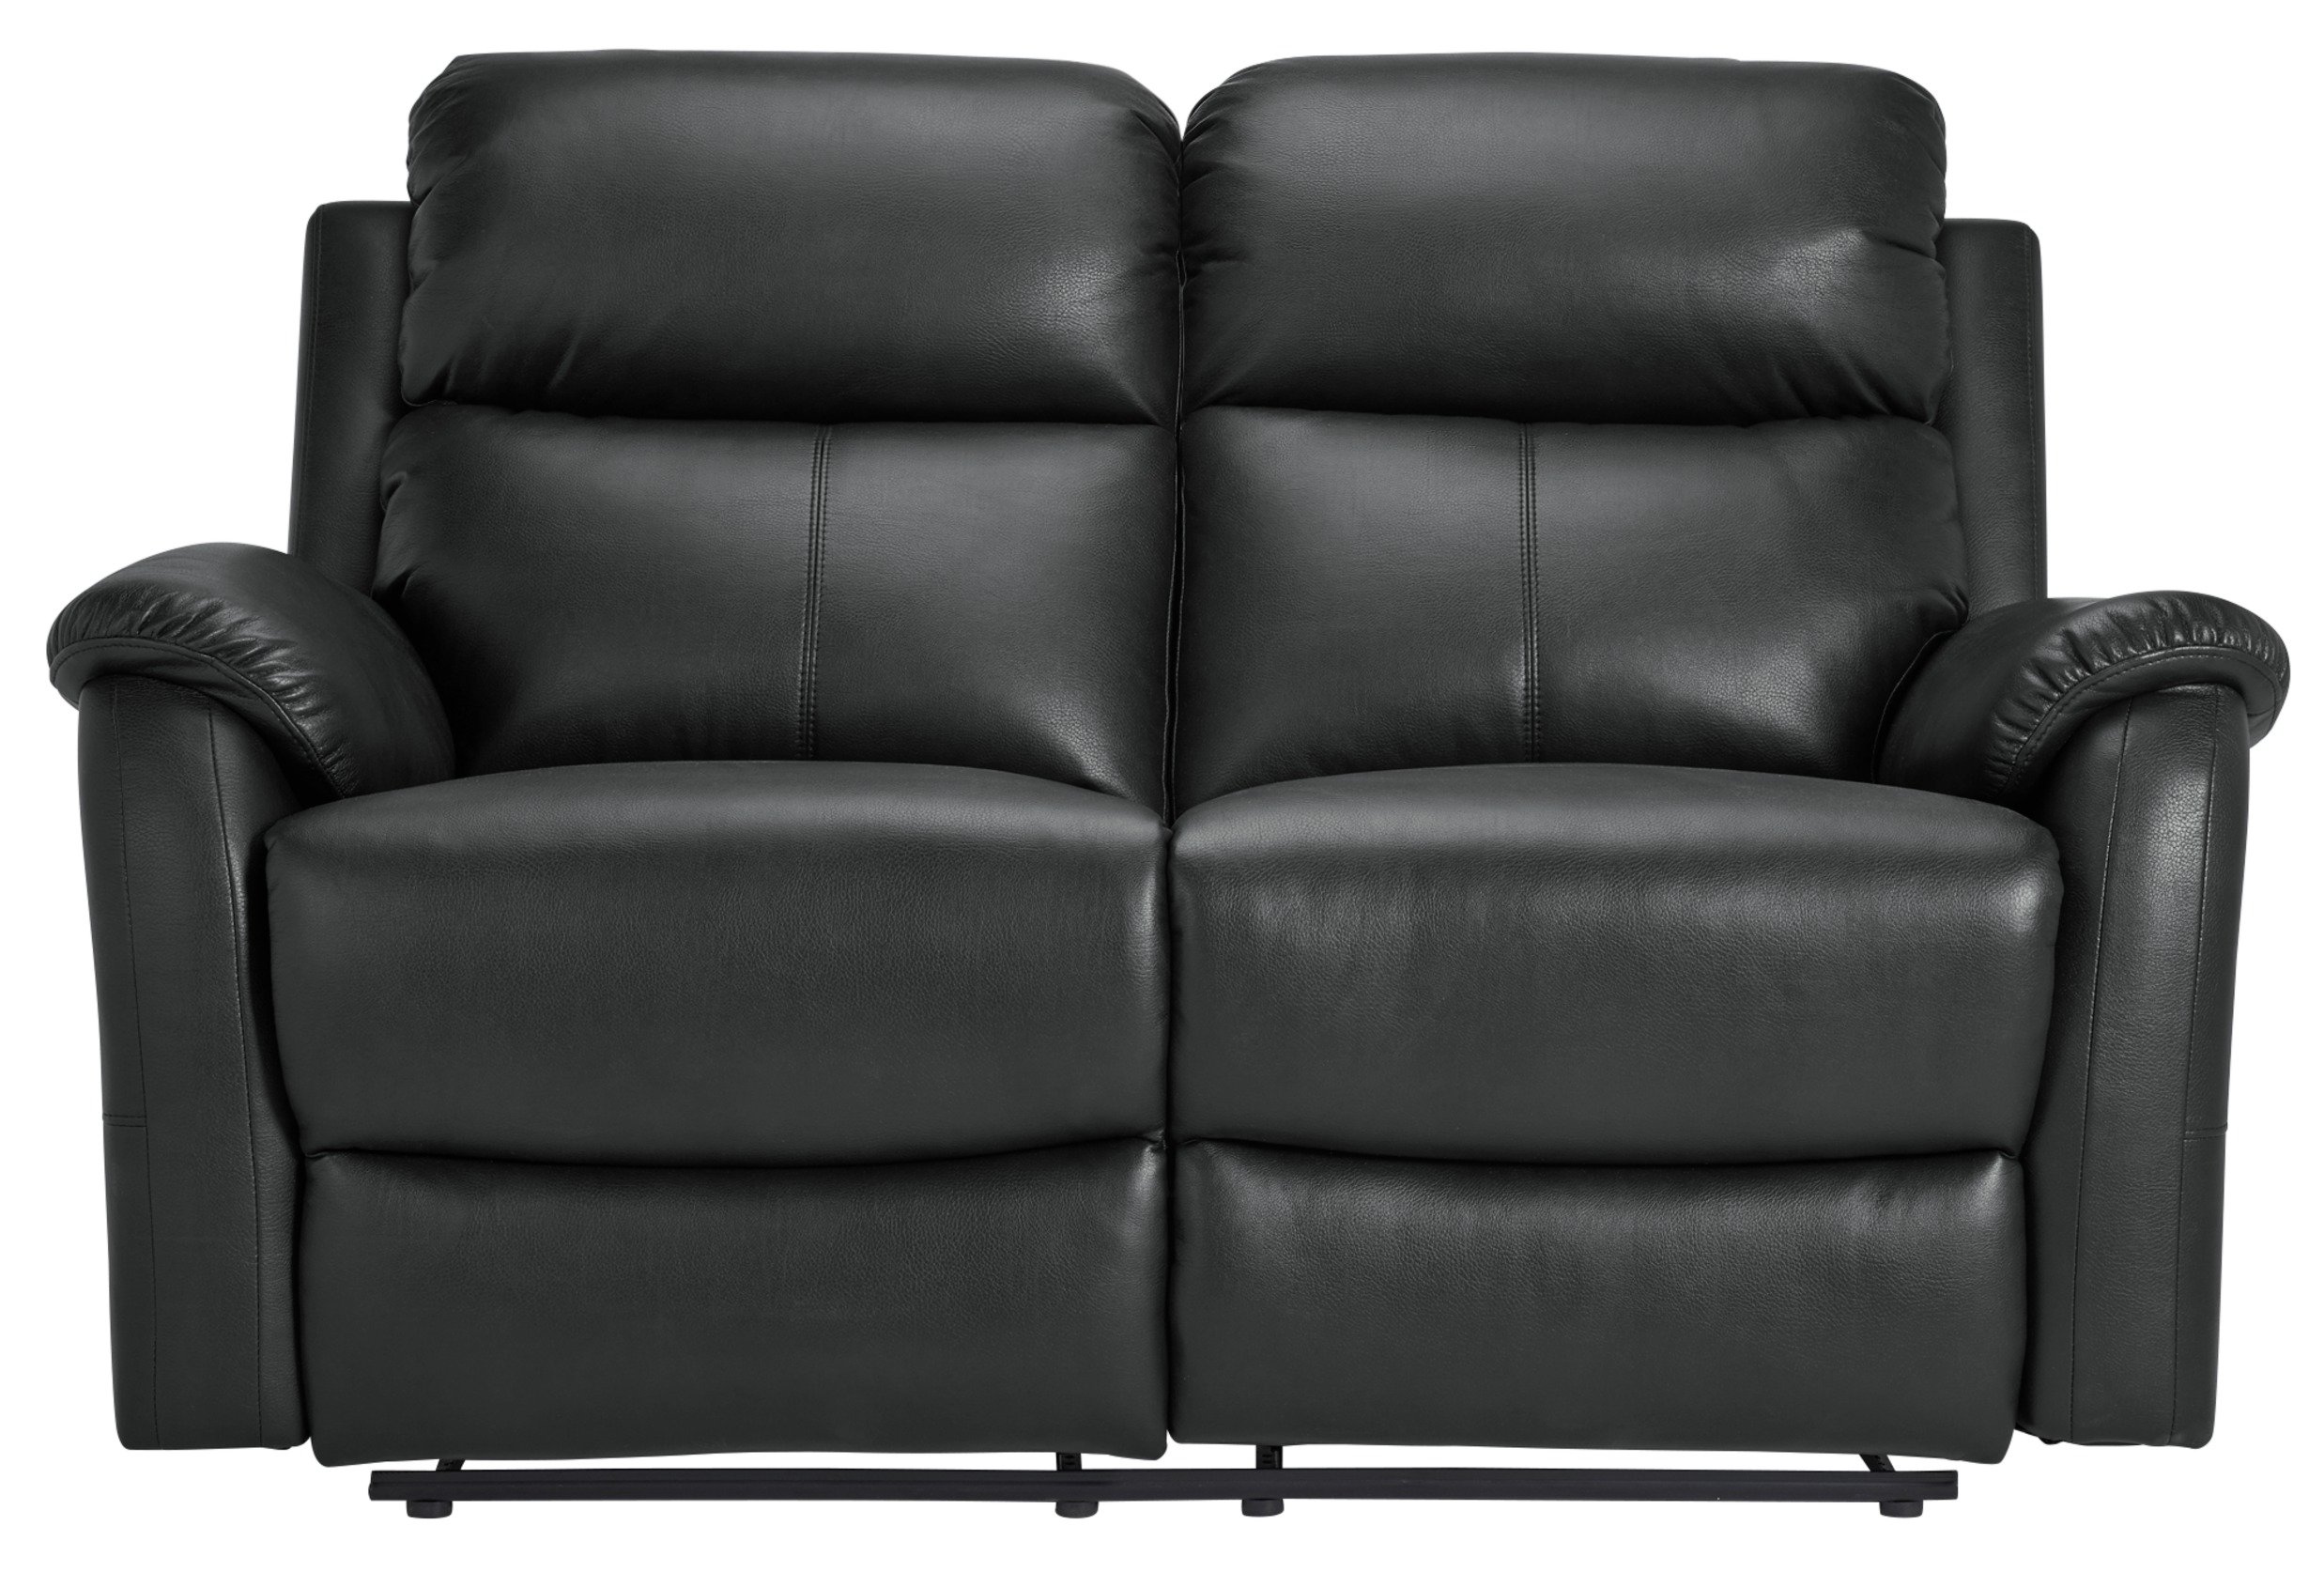 Argos Home Tyler 2 Seater - Leather Effect Recliner Sofa Reviews